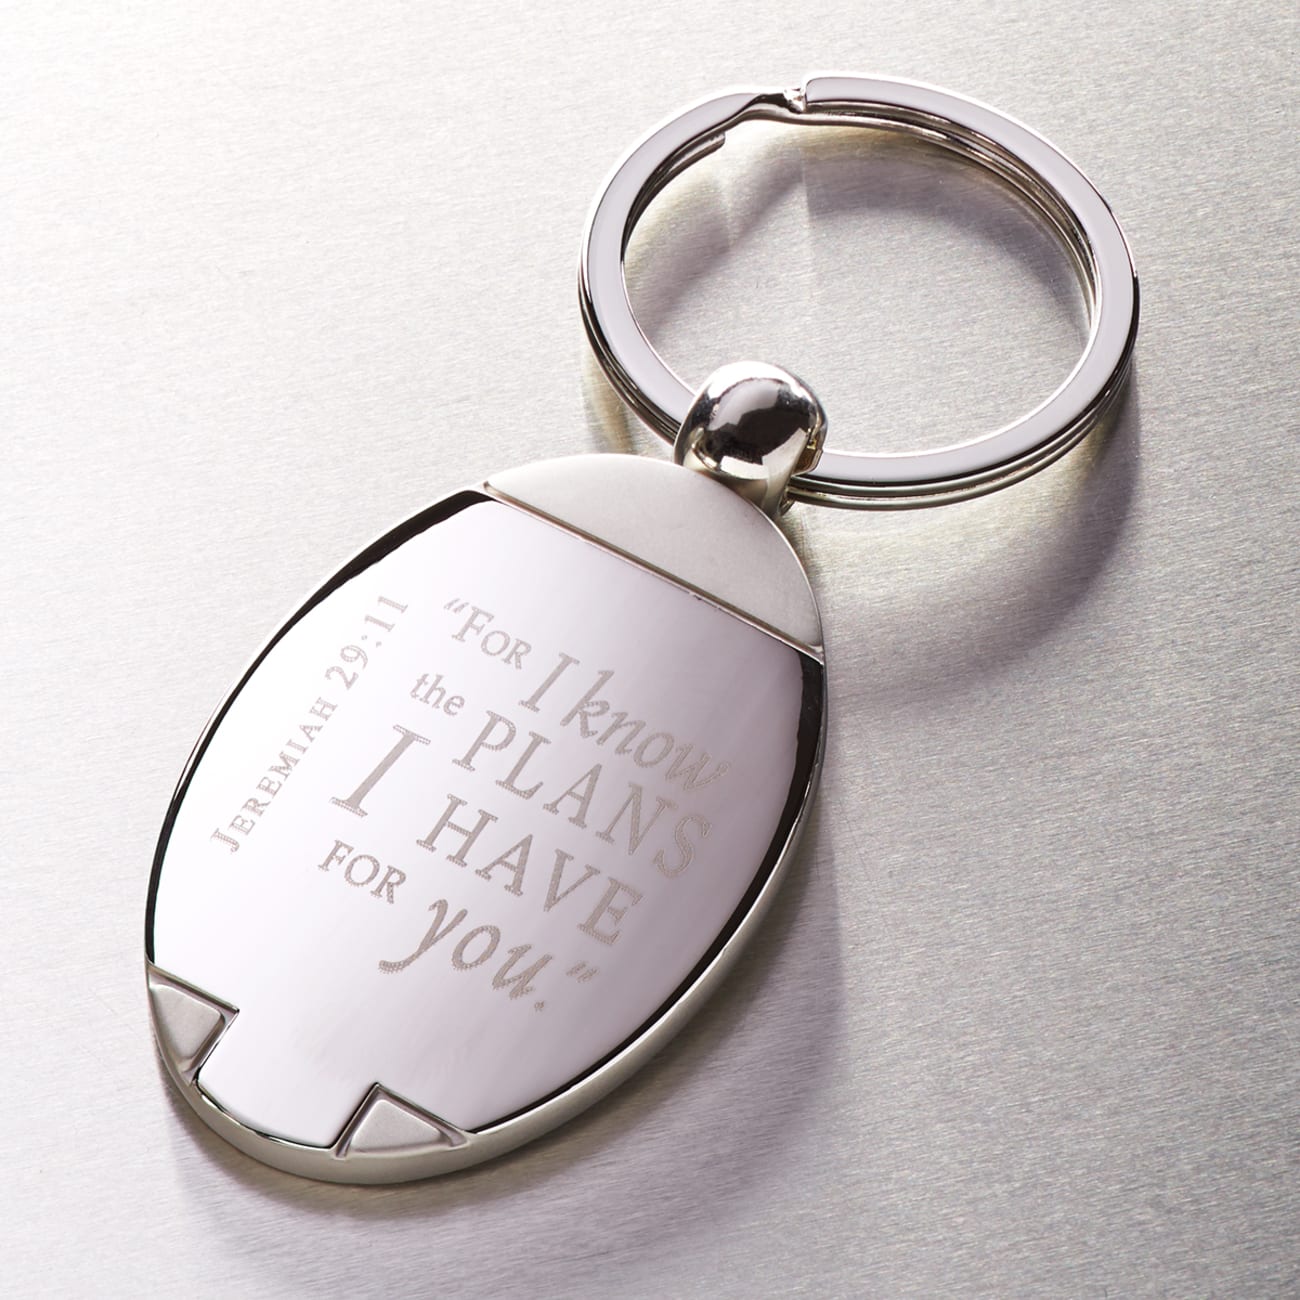 Quality Metal Keyring: Jeremiah 29:11, For I Know the Plans I Have For You Jewellery